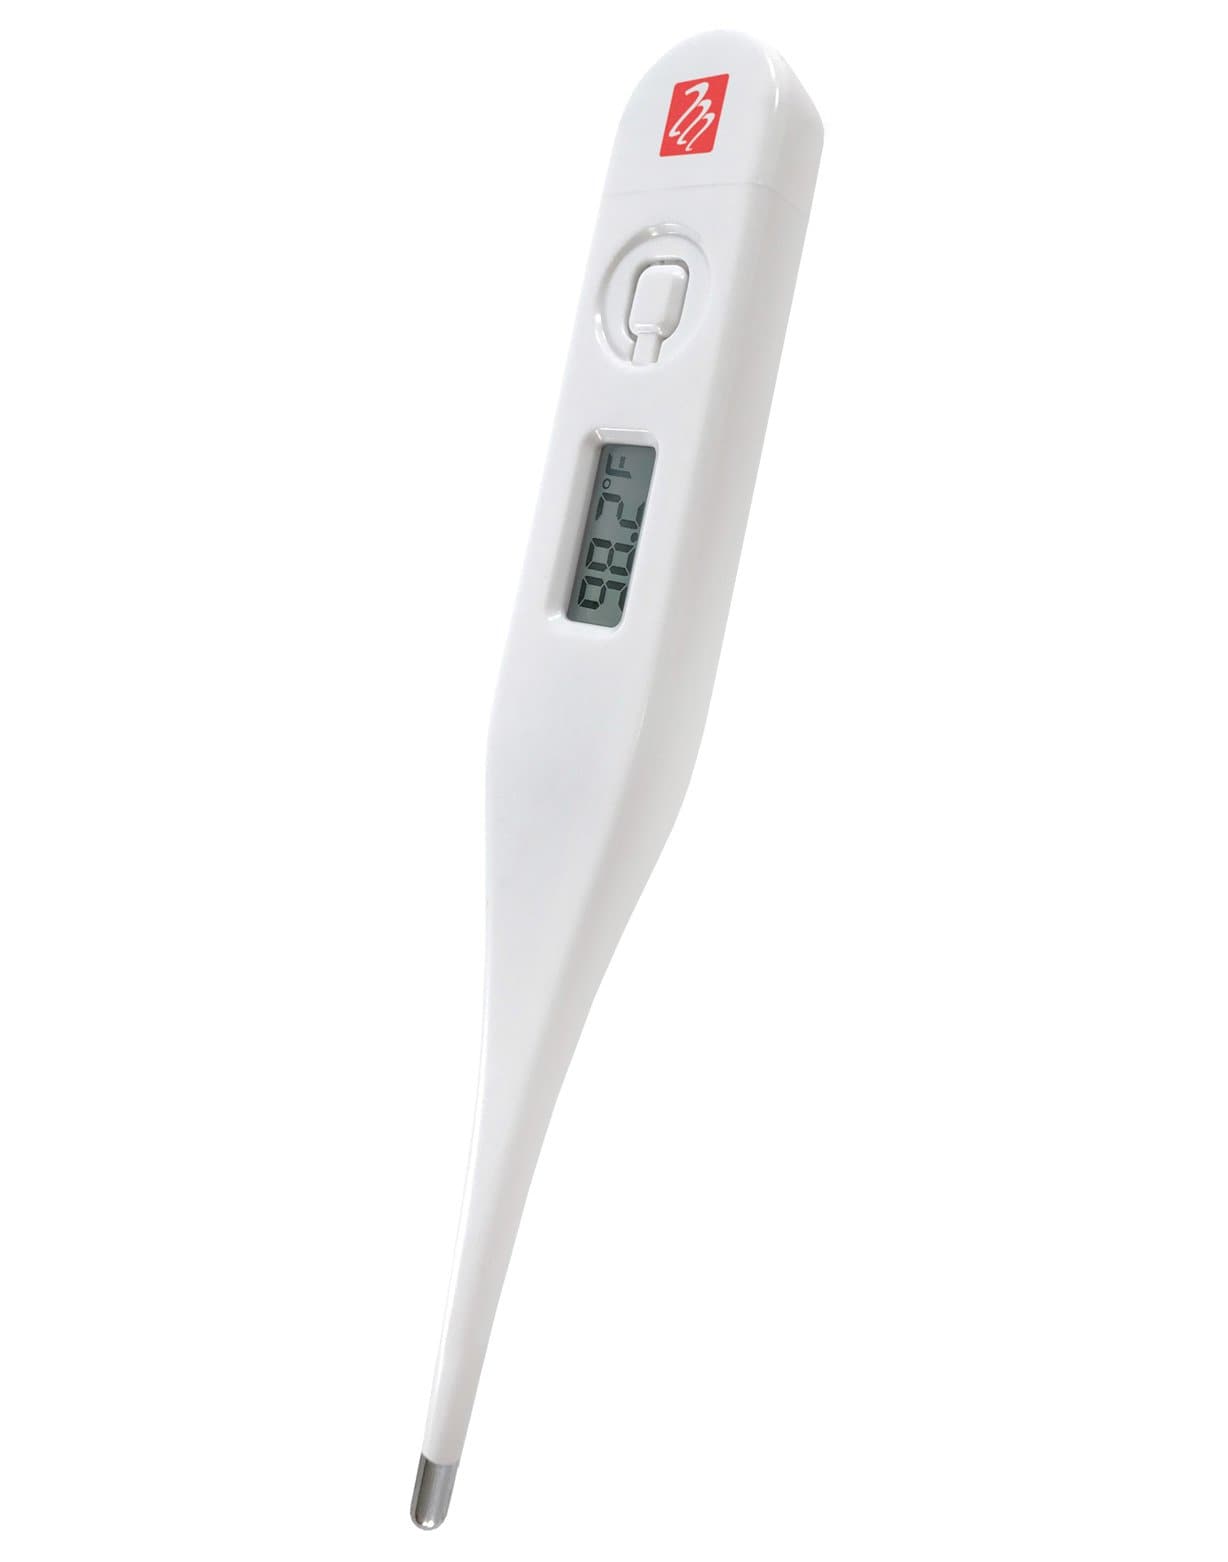 Prestige Medical White Digital Thermometer with Recall Readings - Senior.com Digital Thermometers